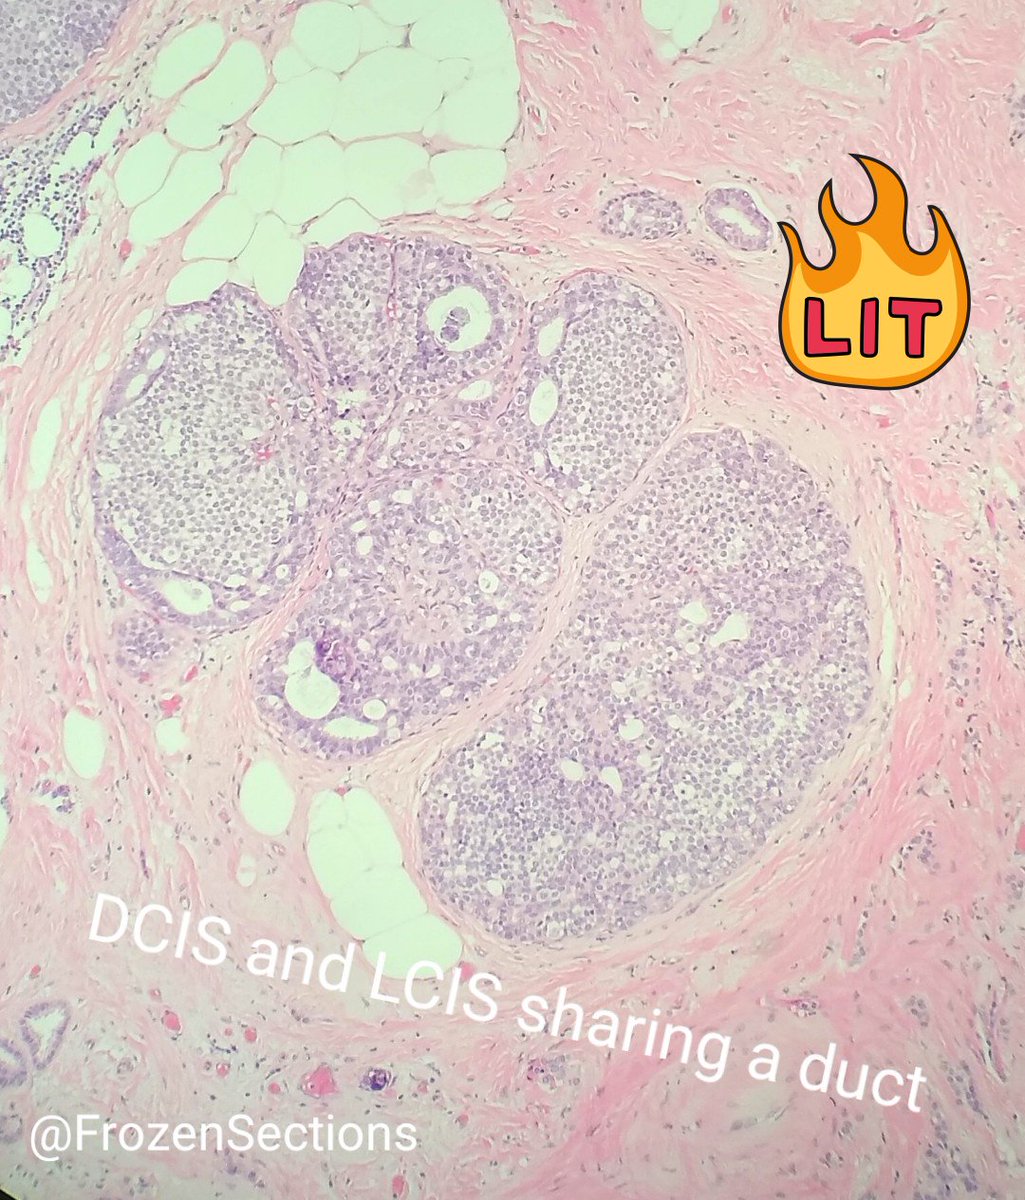 One man cannot serve two Masters? Well, here is a duct with both DCIS and LCIS 😎 Happy Pathology day!  #pathology #breastpath #pathologists #PathologyDay #BSTpath